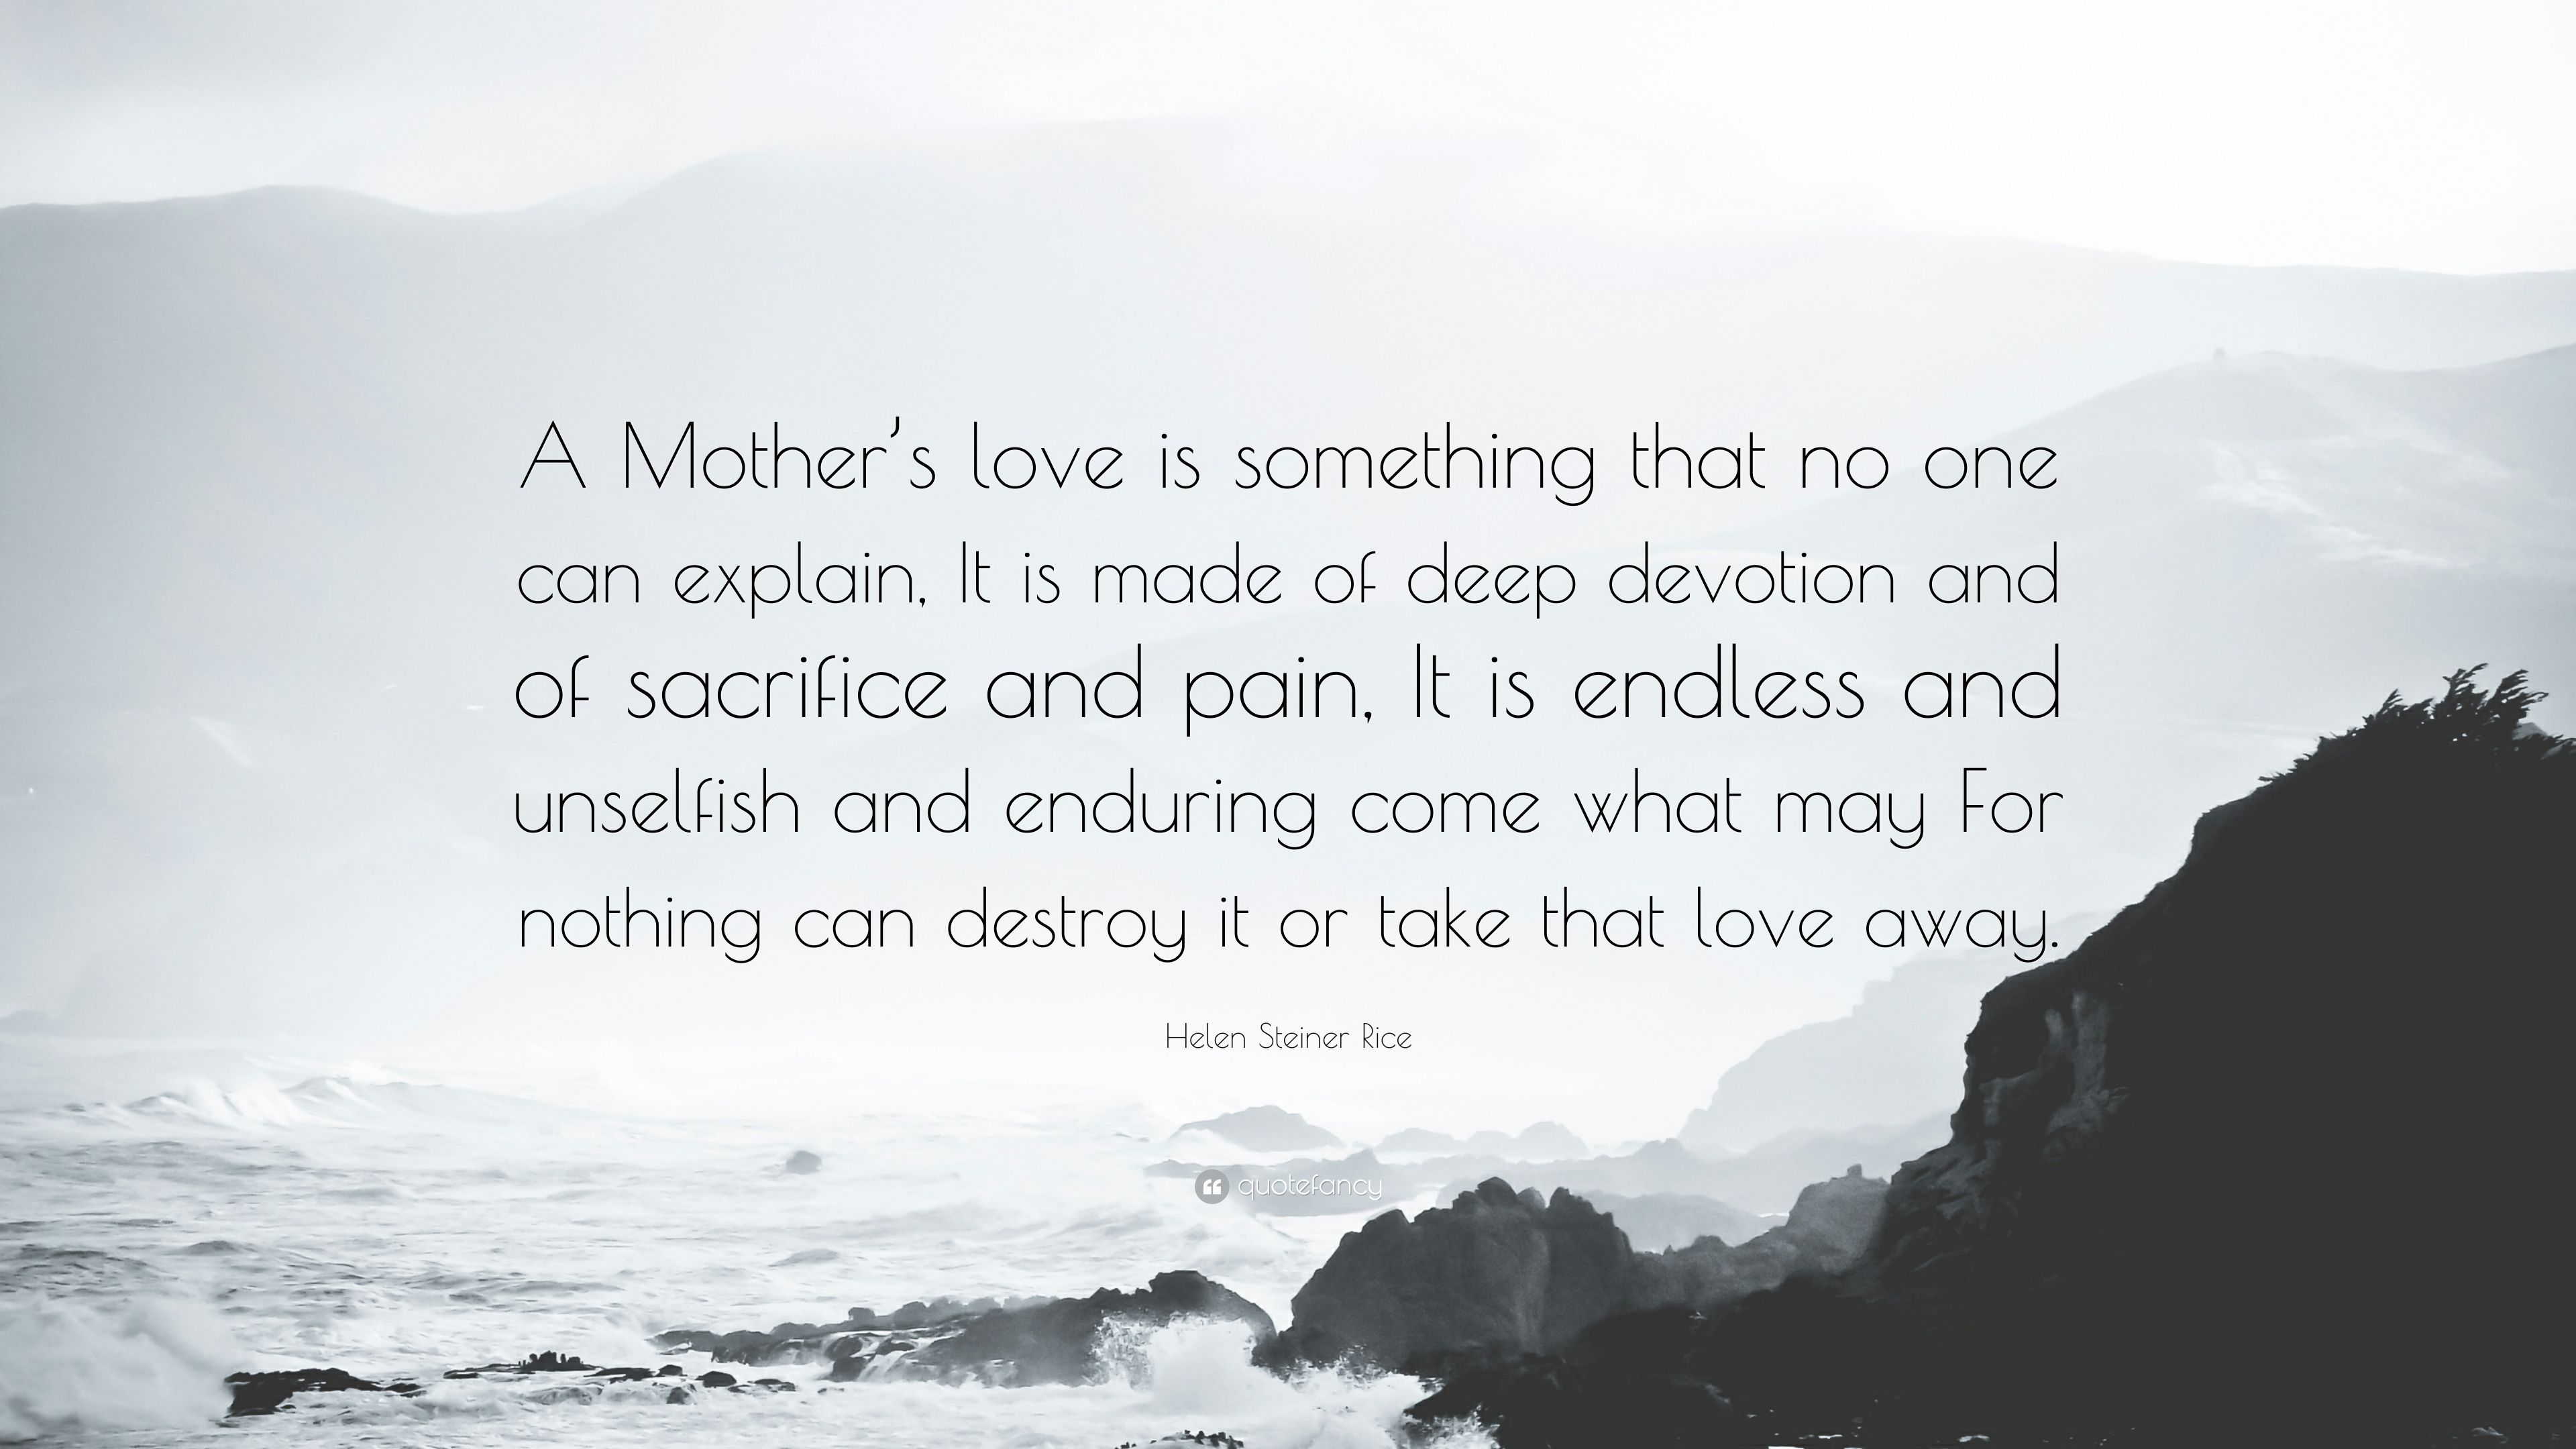 Helen Steiner Rice Quote: “A Mother's love is something that no one ...